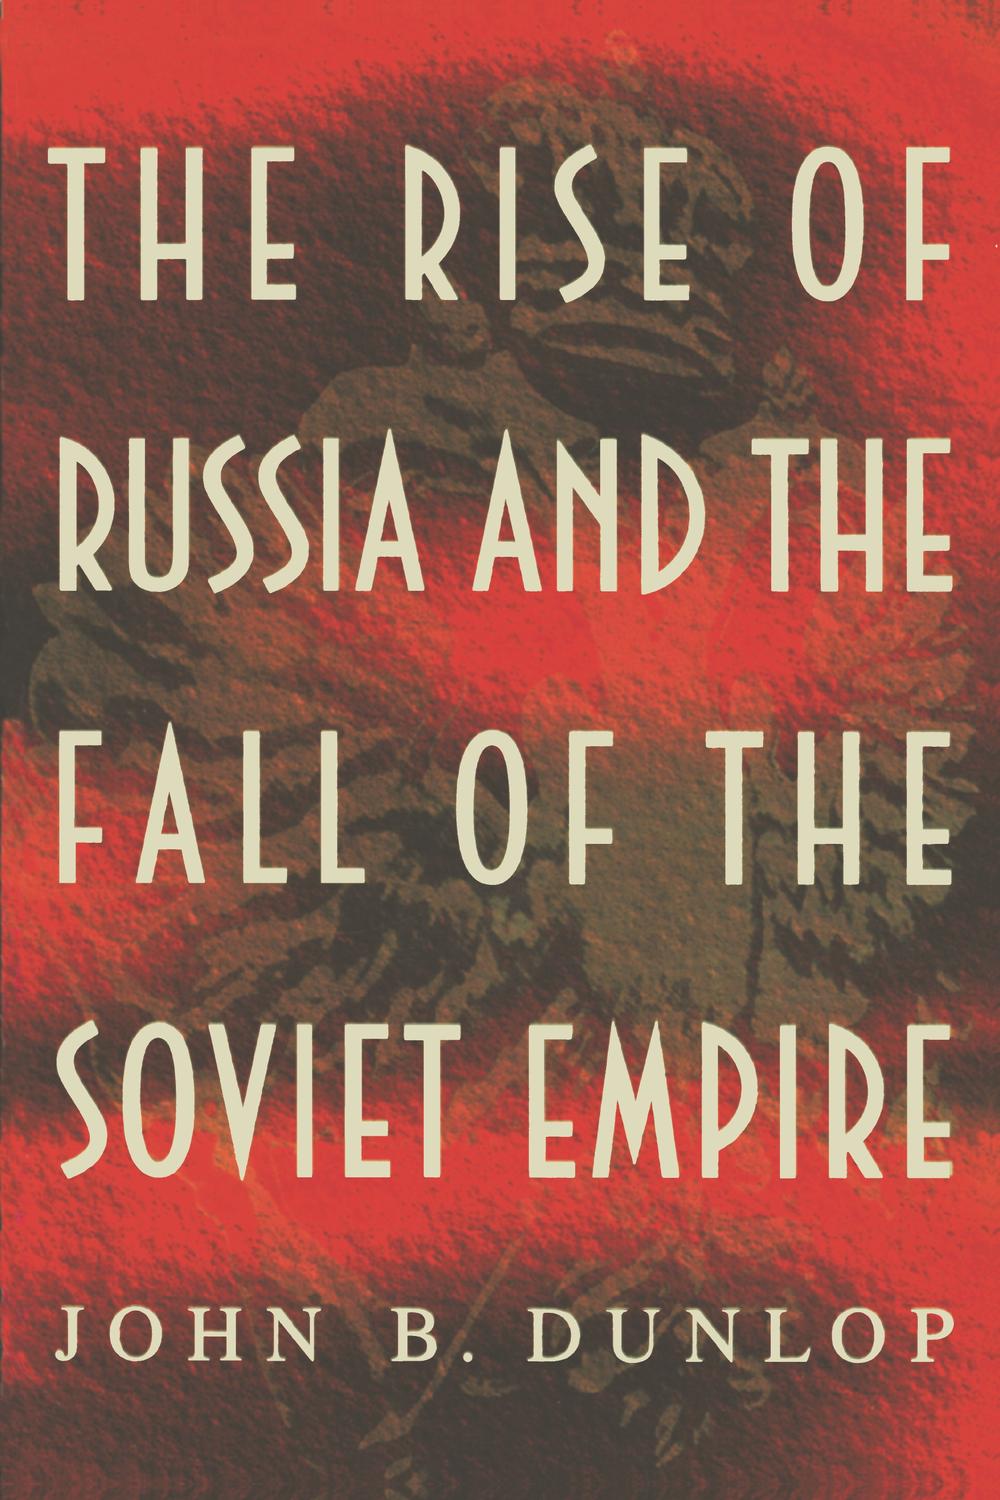 The Rise of Russia and the Fall of the Soviet Empire - John B. Dunlop,,